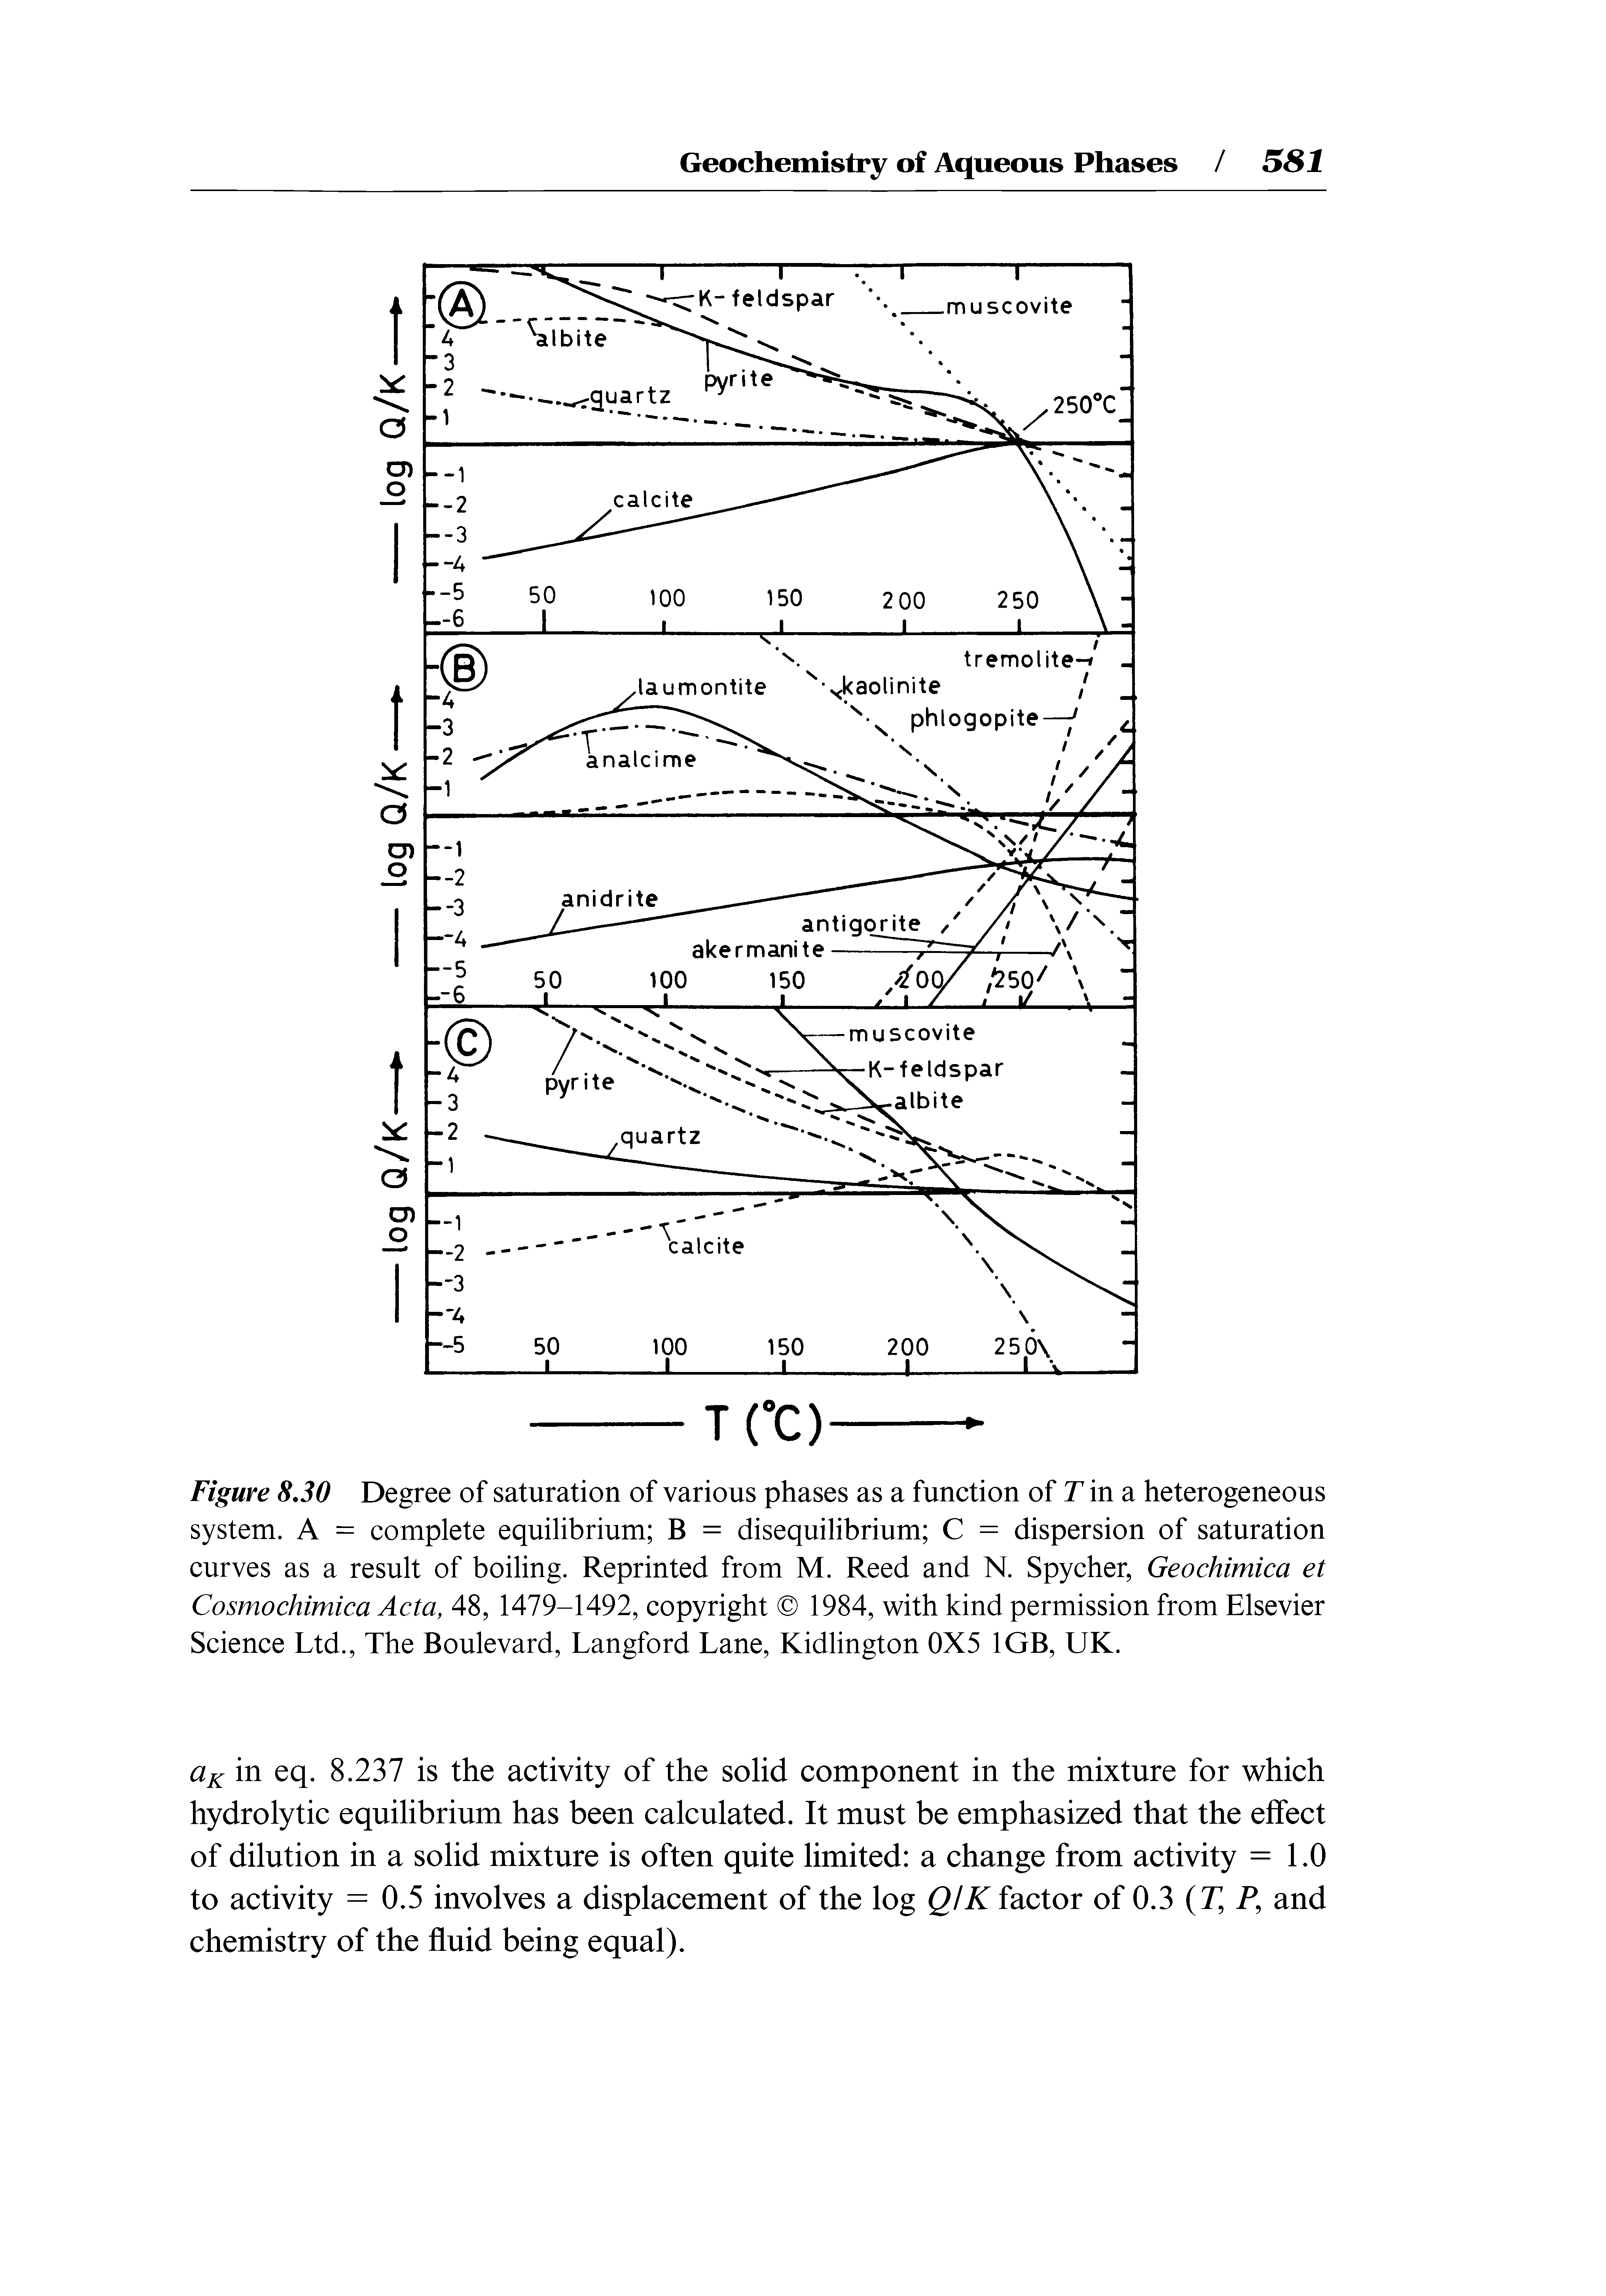 Figure 8.30 Degree of saturation of various phases as a function of T in a heterogeneous system. A = complete equilibrium B = disequilibrium C = dispersion of saturation curves as a result of boiling. Reprinted from M. Reed and N. Spycher, Geochimica et Cosmochimica Acta, 48, 1479-1492, copyright 1984, with kind permission from Elsevier Science Ltd., The Boulevard, Langford Lane, Kidlington 0X5 1GB, UK.